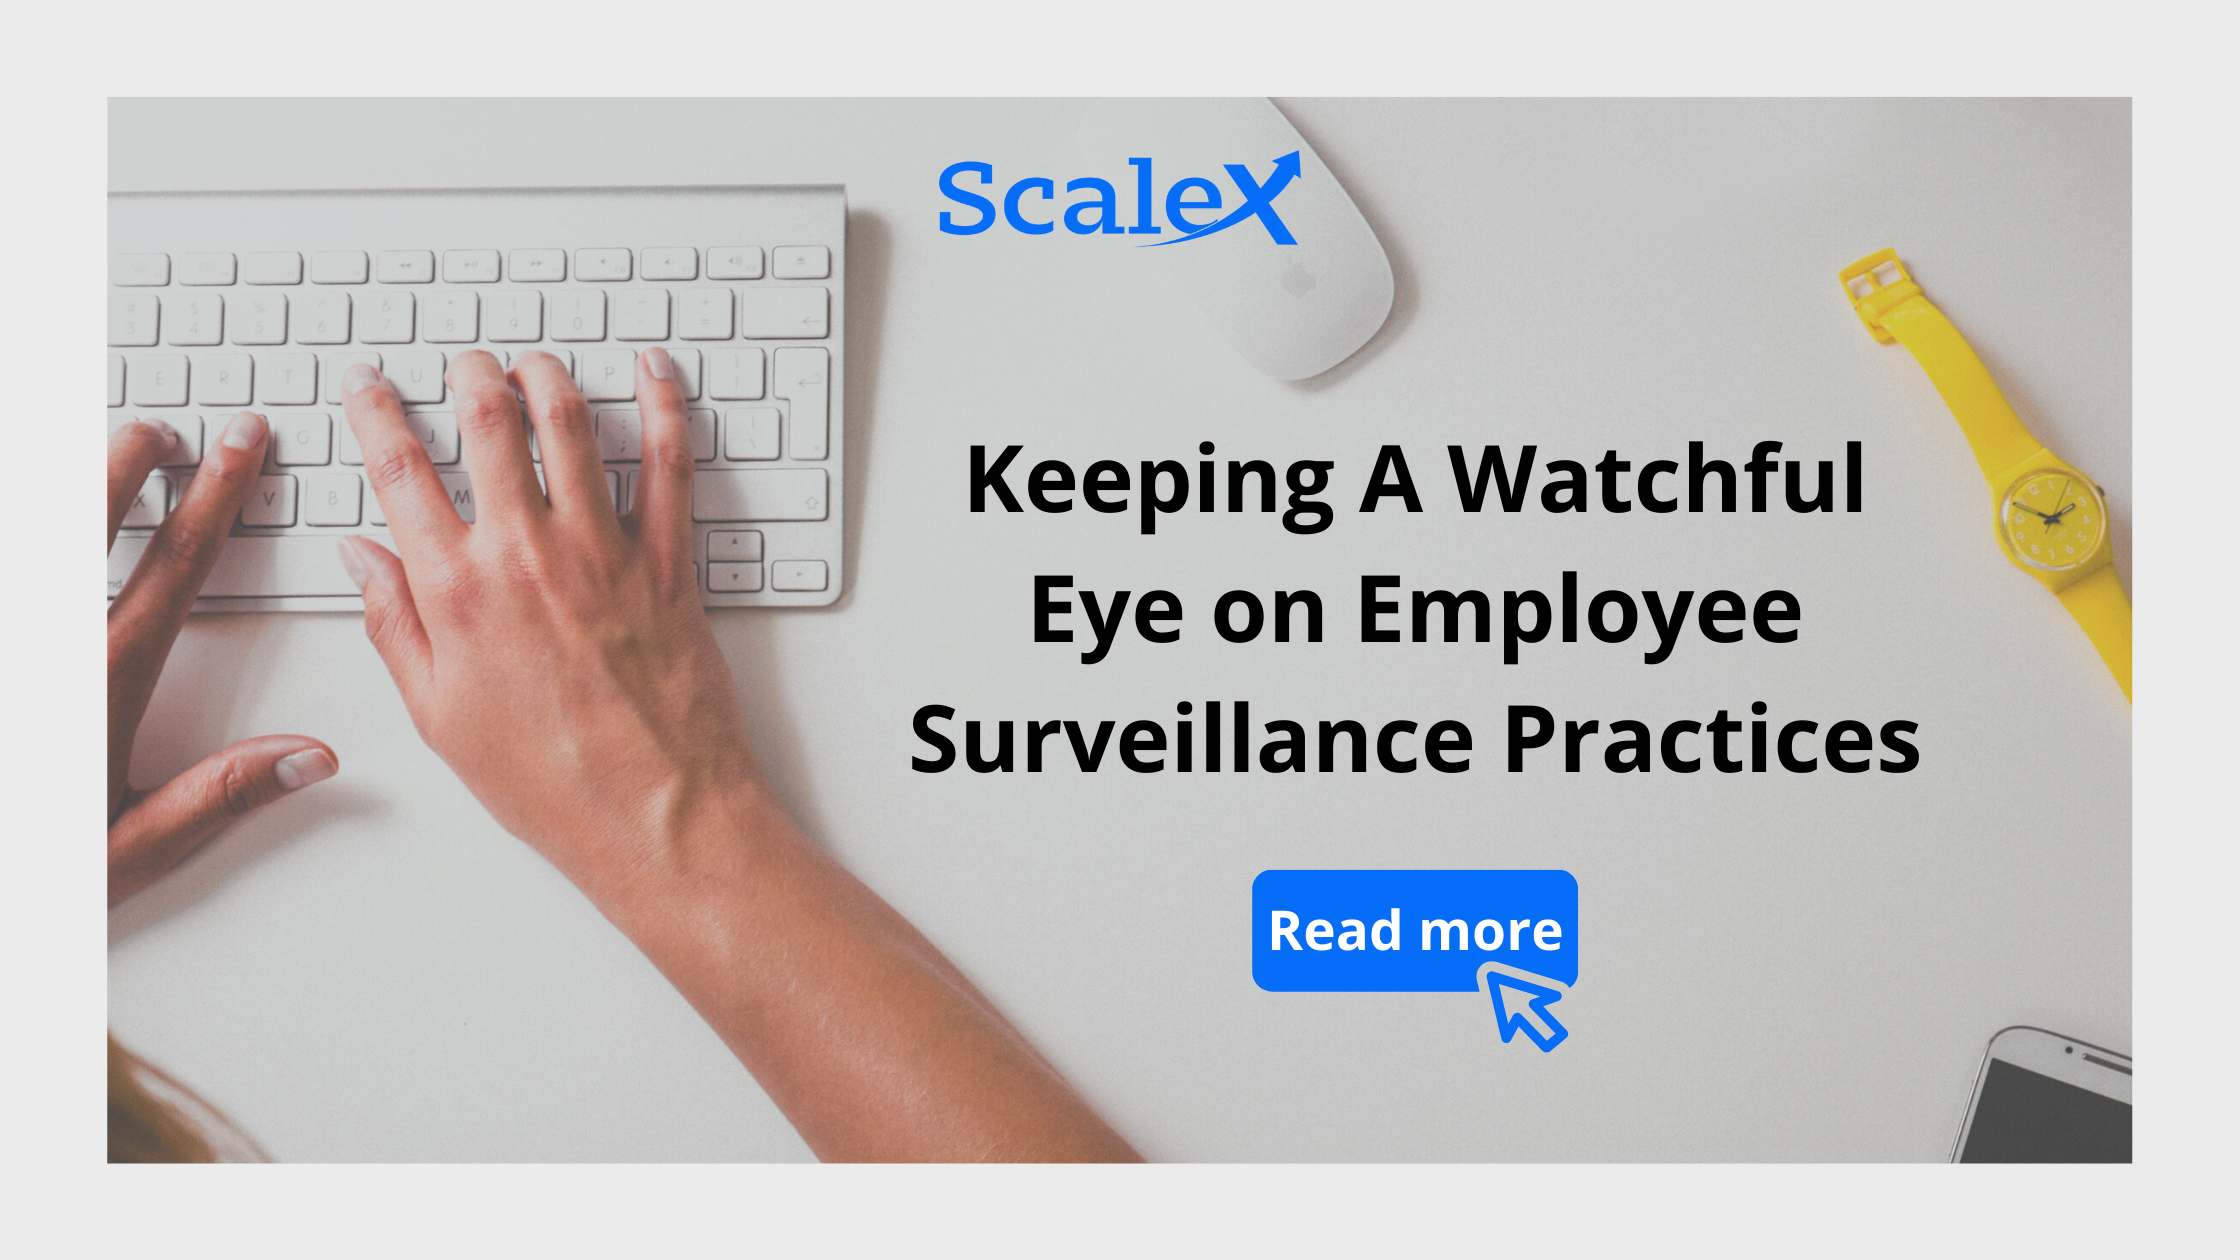 Keeping A Watchful Eye on Employee Surveillance Practices